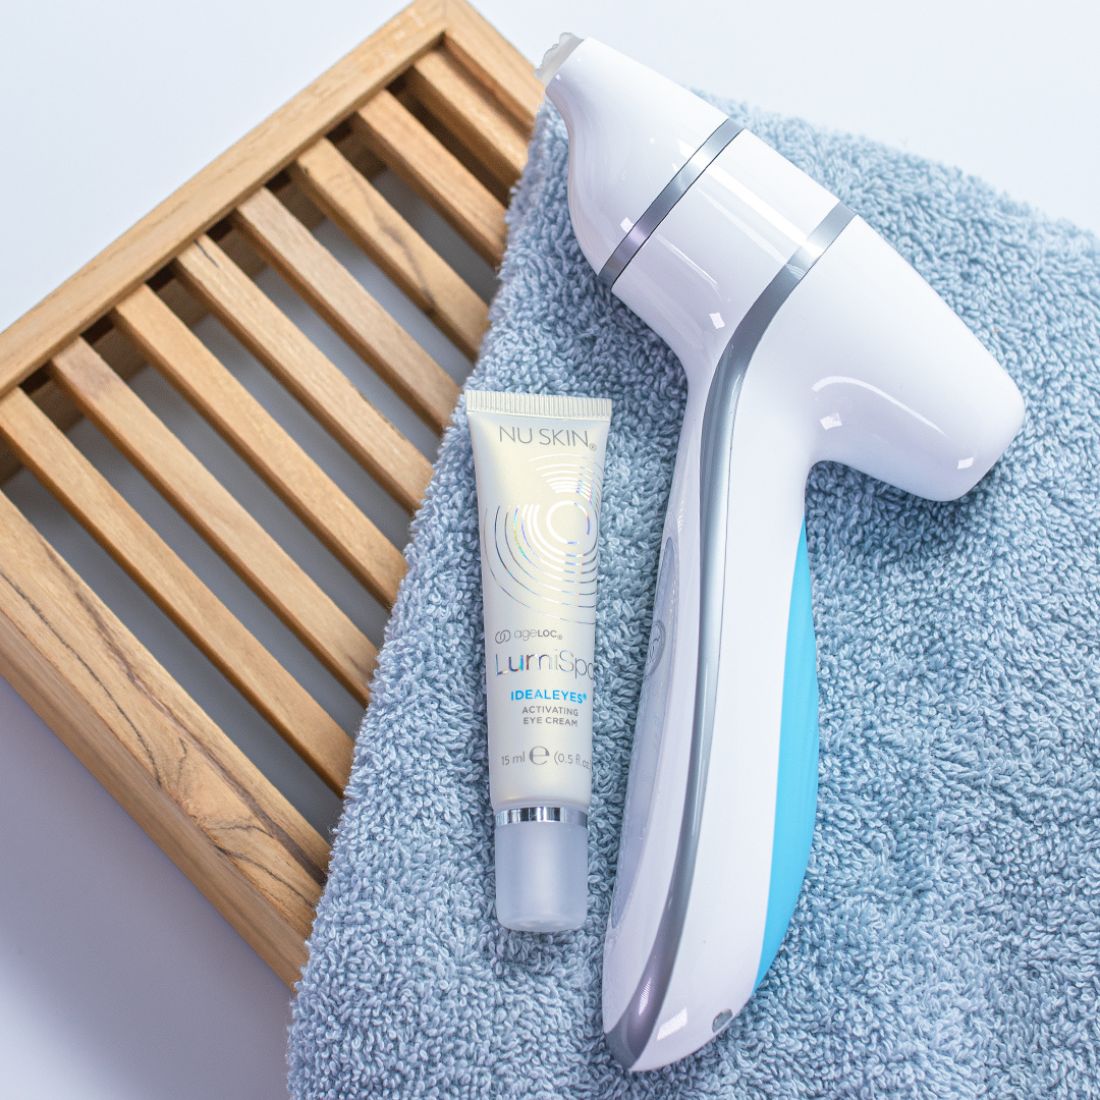 ageLOC LumiSpa Accent pairs up with IdealEyes to gently exfoliate, stimulate and invigorate delicate skin around your eyes. Massage away unwanted signs of stress and tiredness to freshen up with captivating eyes full of life! 